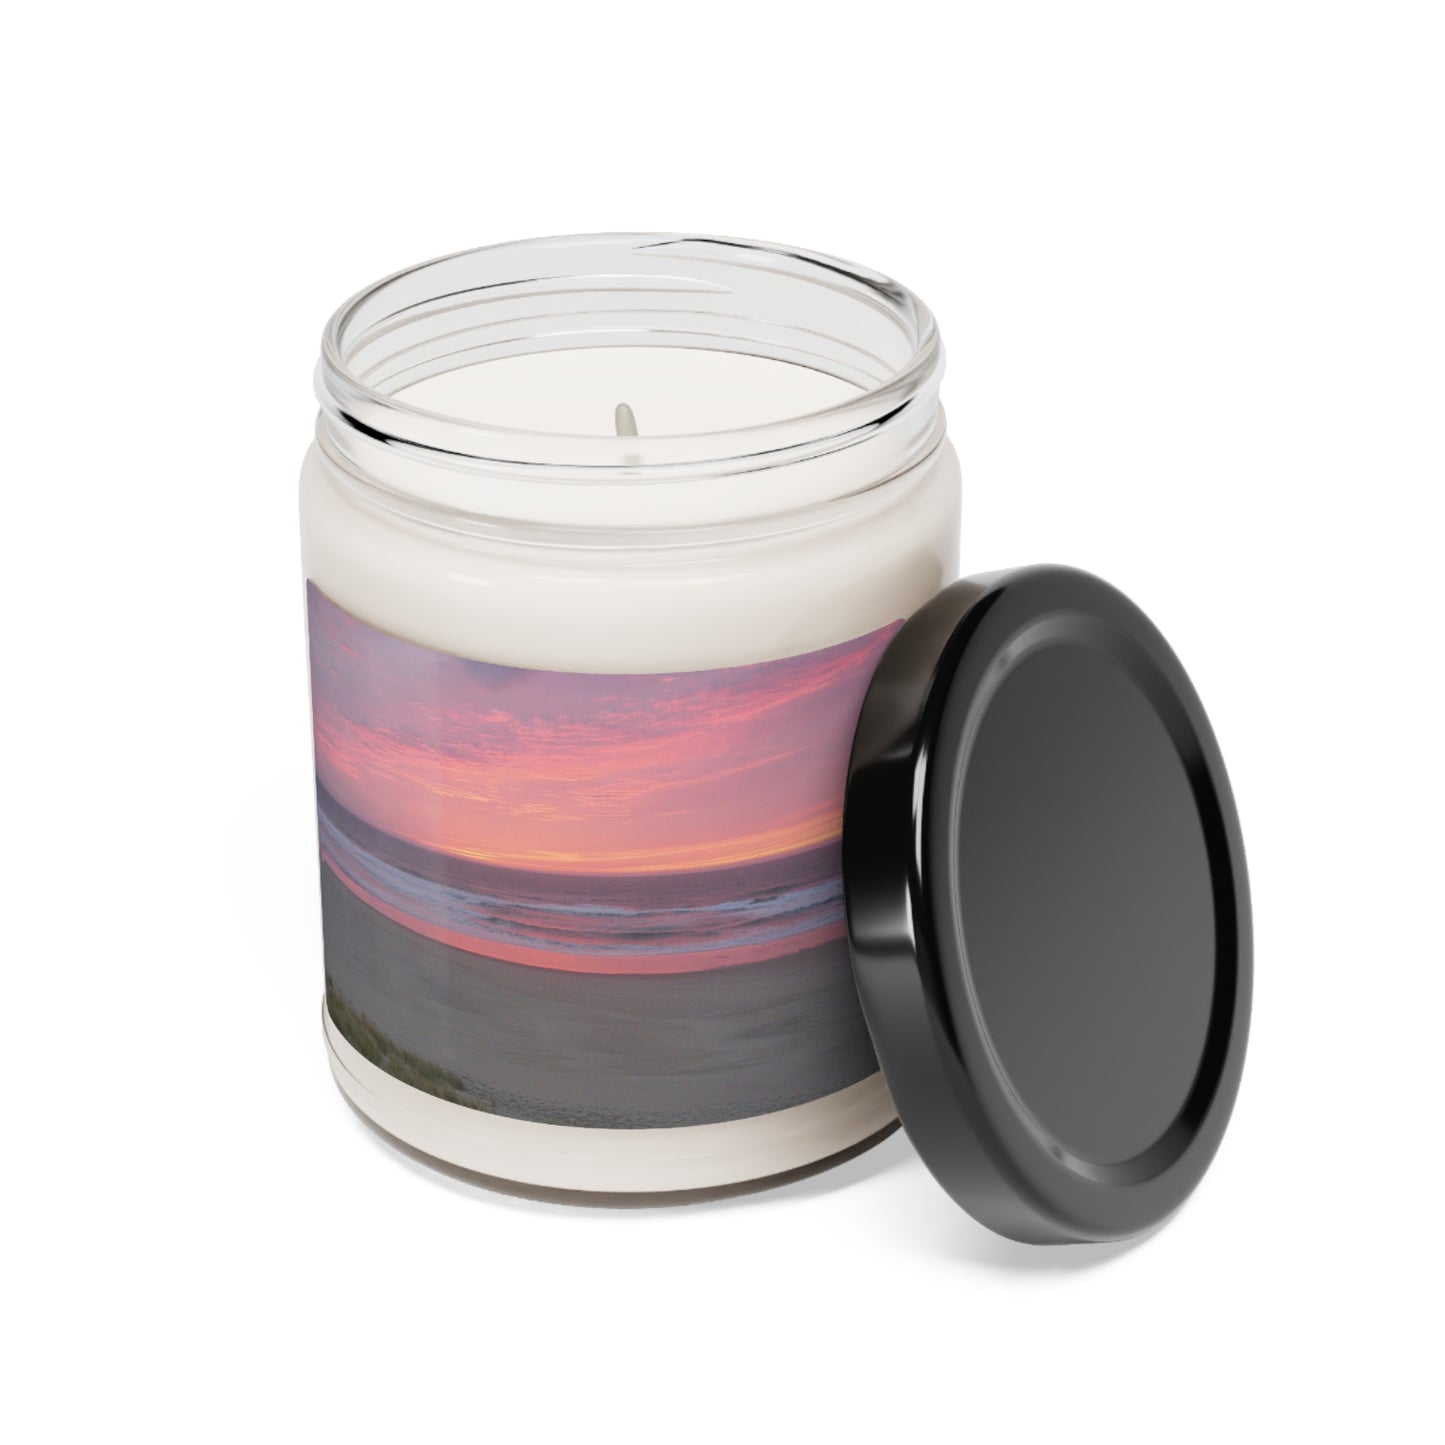 Pink Ocean Sunset Scented Soy Candle, 9oz